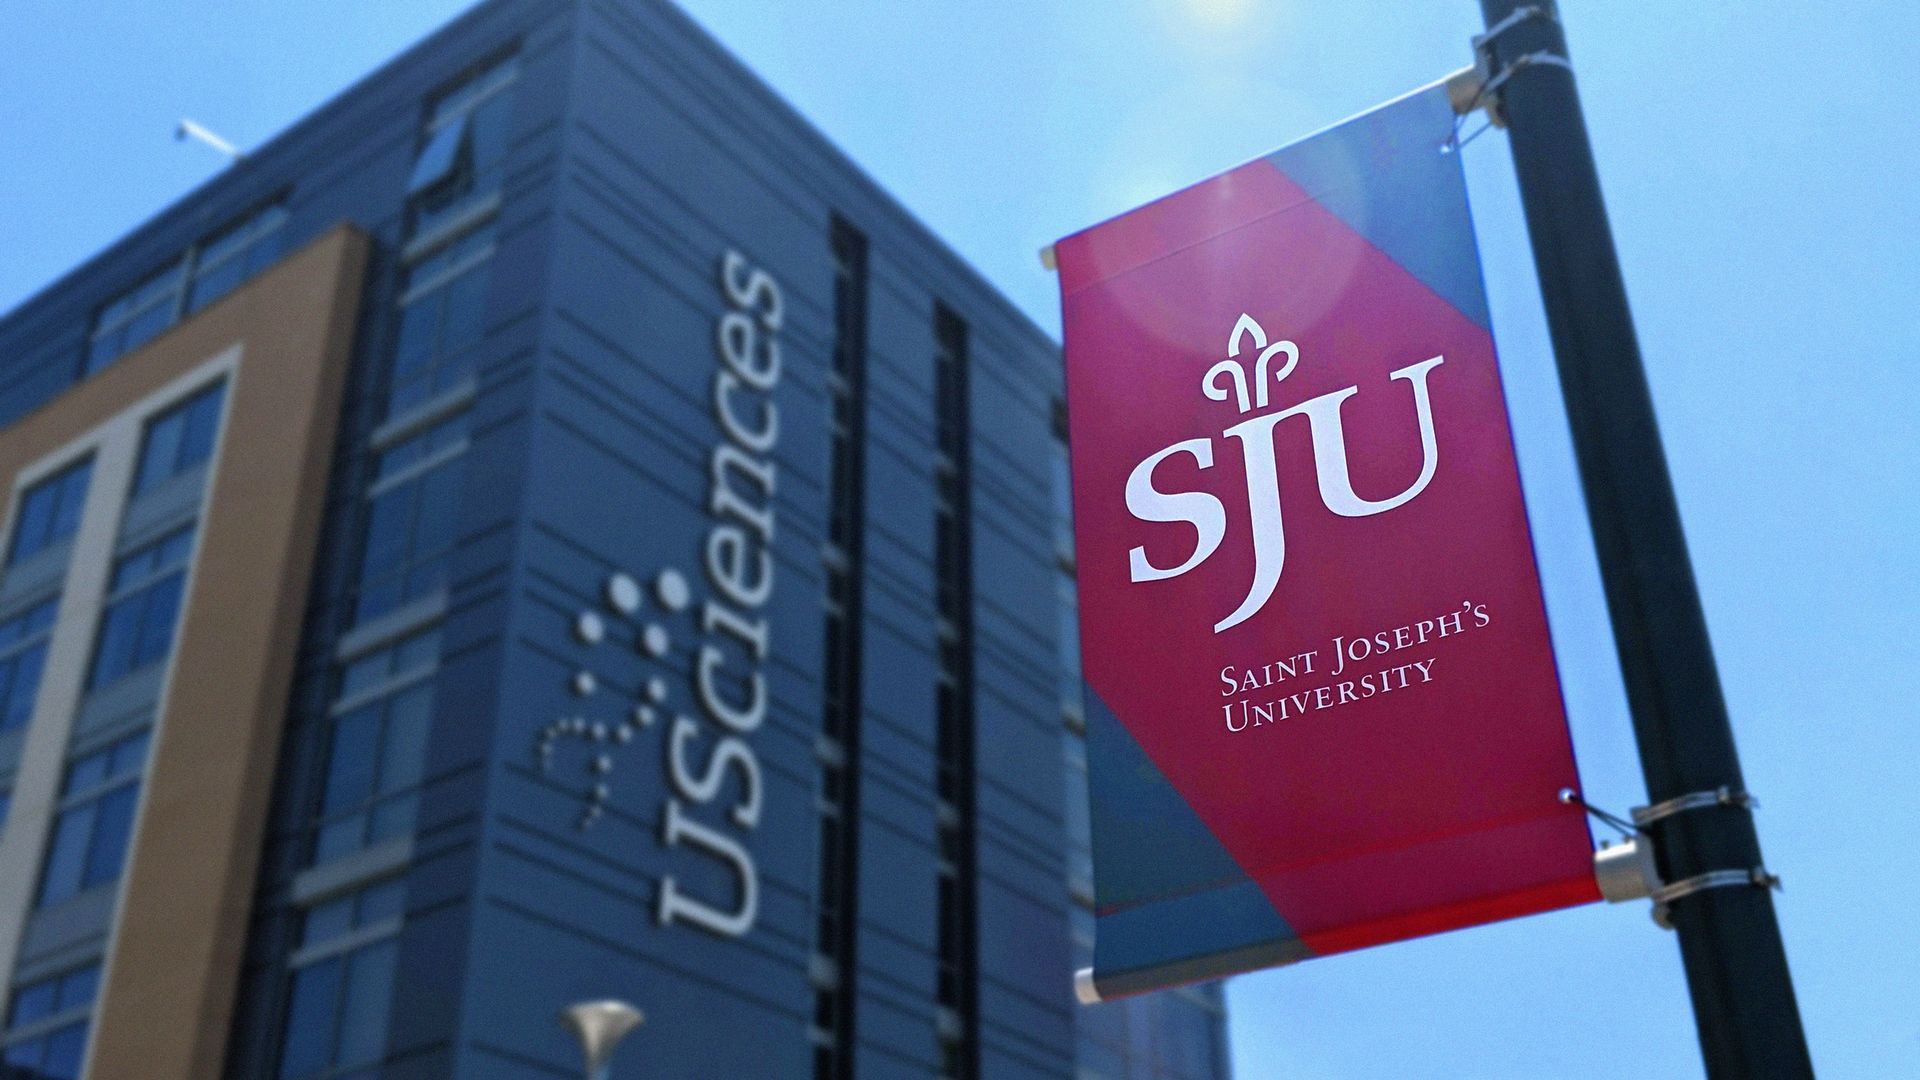 A Saint Joseph's University banner hangs in front of a University of the Sciences building